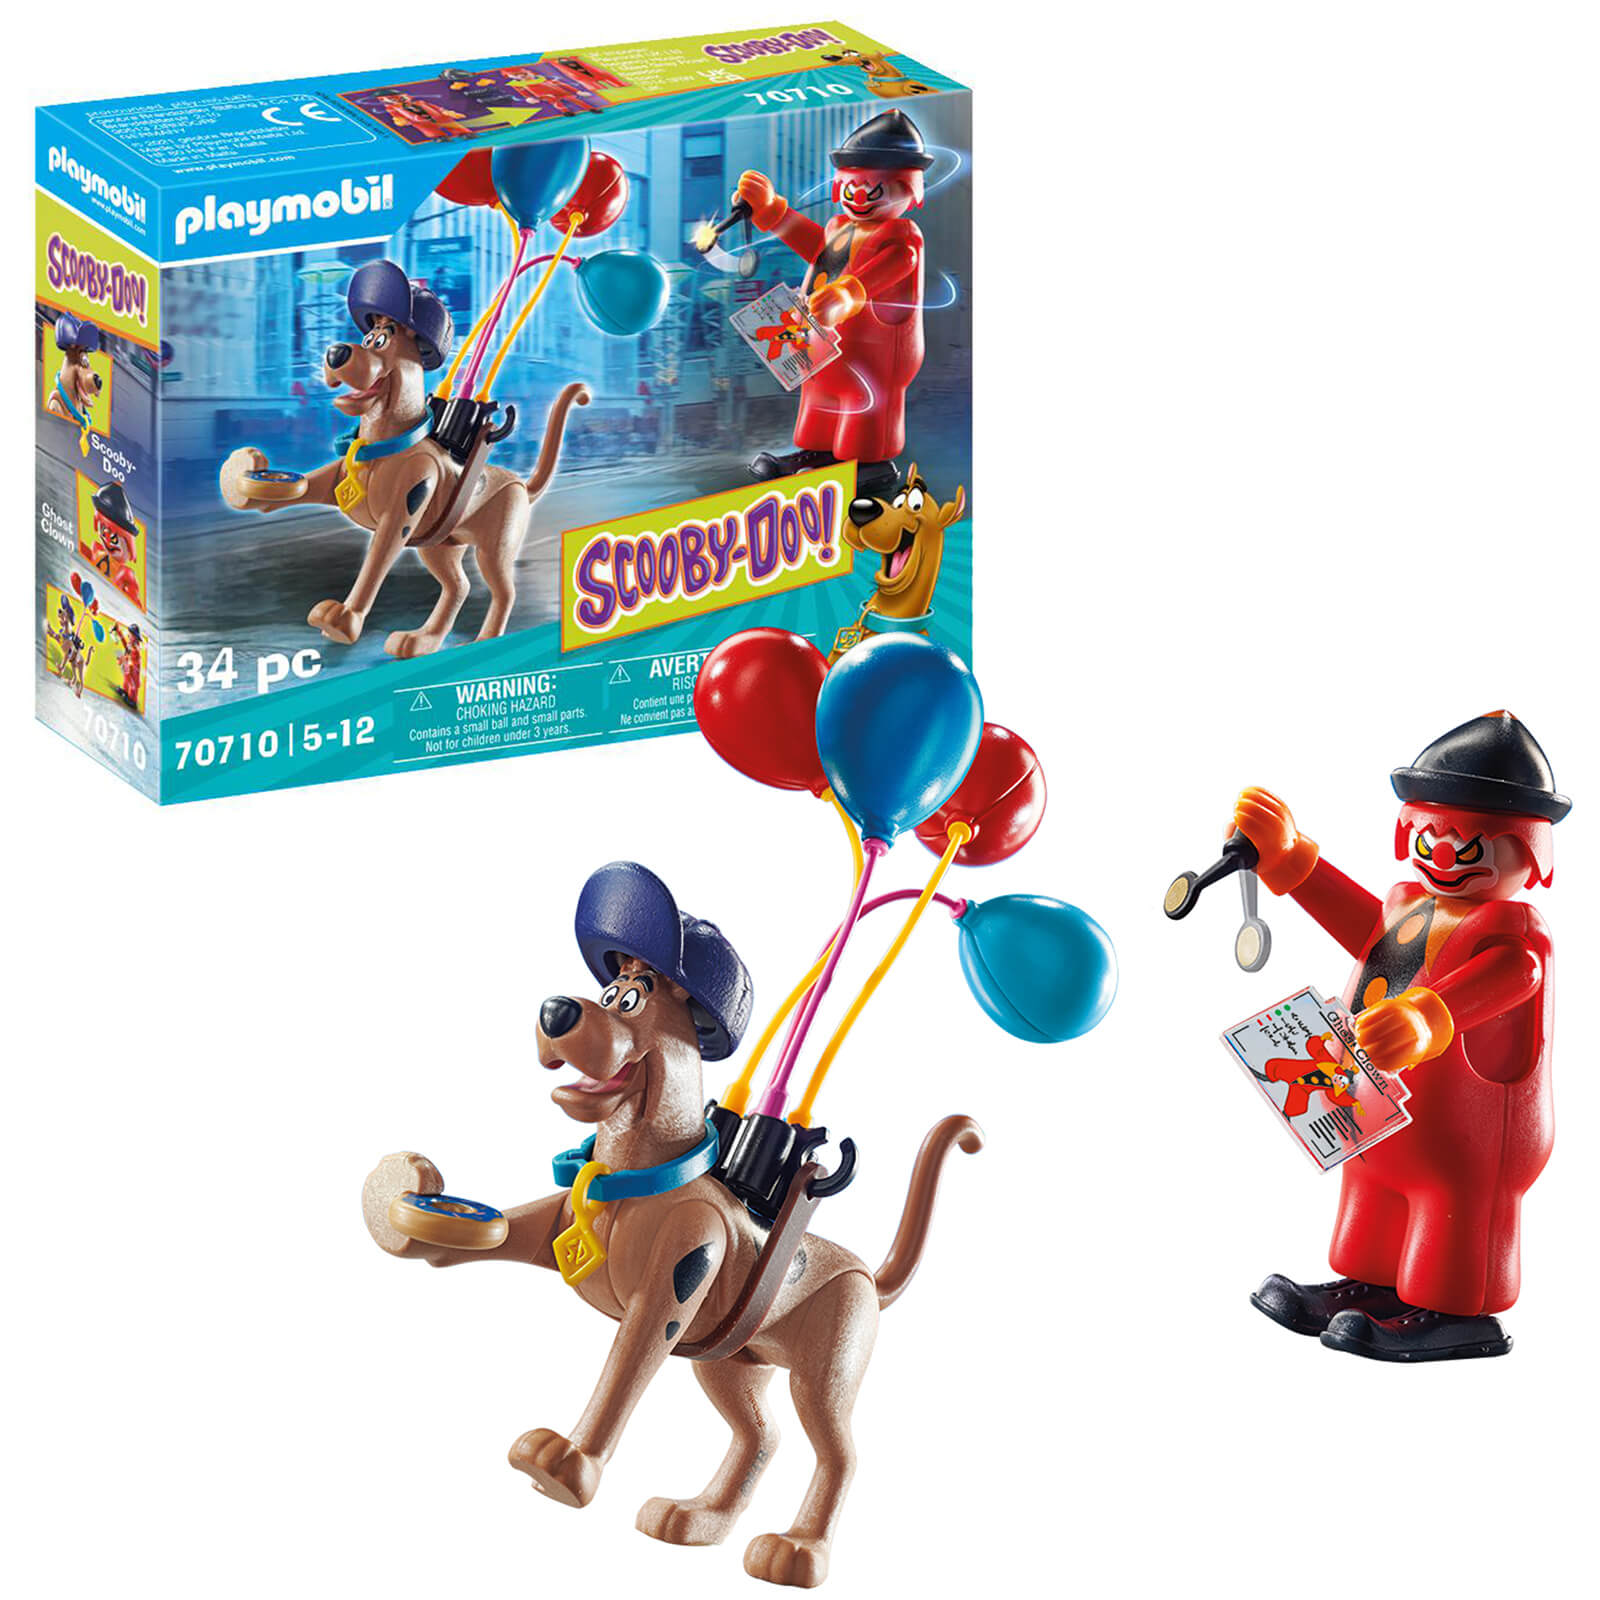 Playmobil SCOOBY-DOO! Adventure with Ghost Clown (70710)